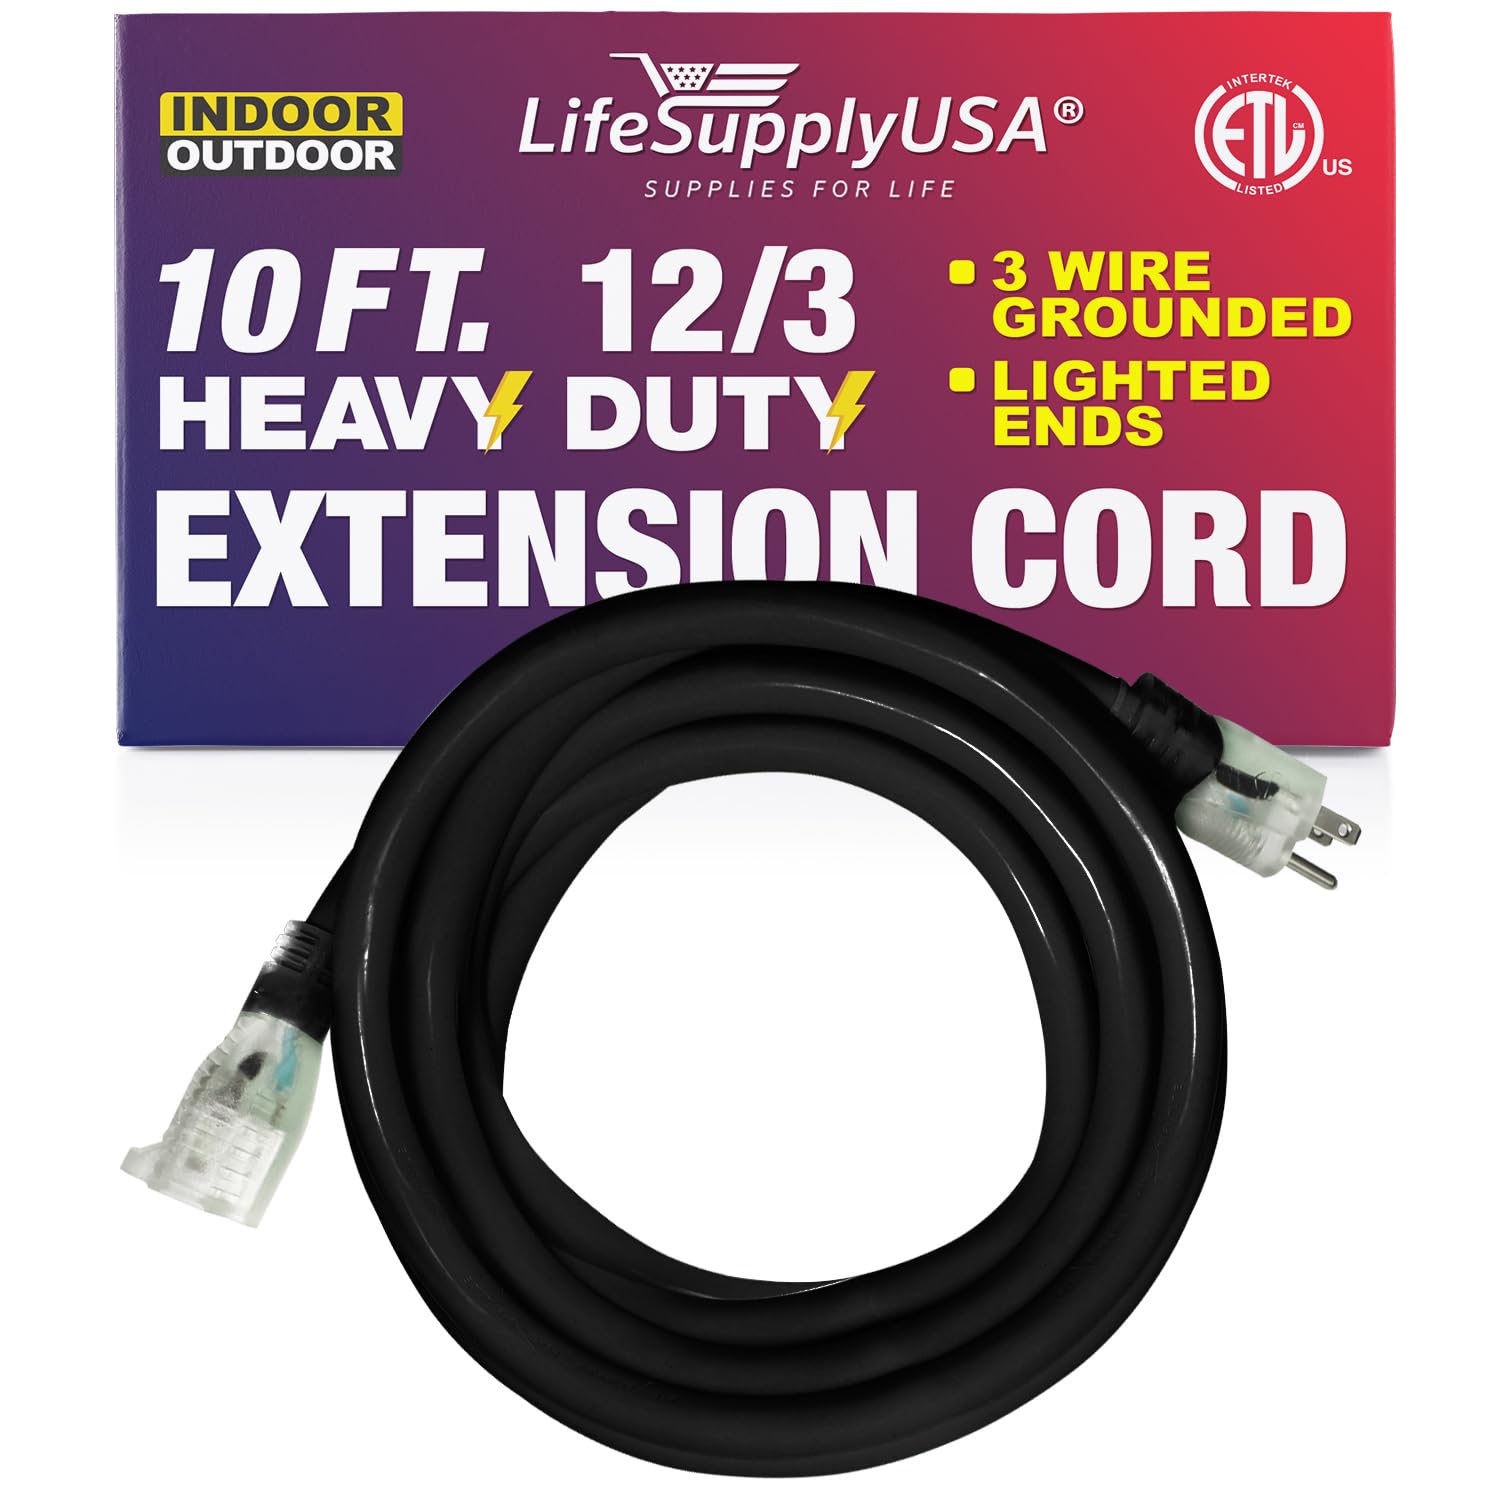 10 ft Power Extension Cord Outdoor  Indoor Heavy Duty 12 Gauge/3 Prong SJTW  (Black) Lighted end Extra Durability 15 AMP 125 Volts 1875 Watts ETL Listed  by LifeSupplyUSA